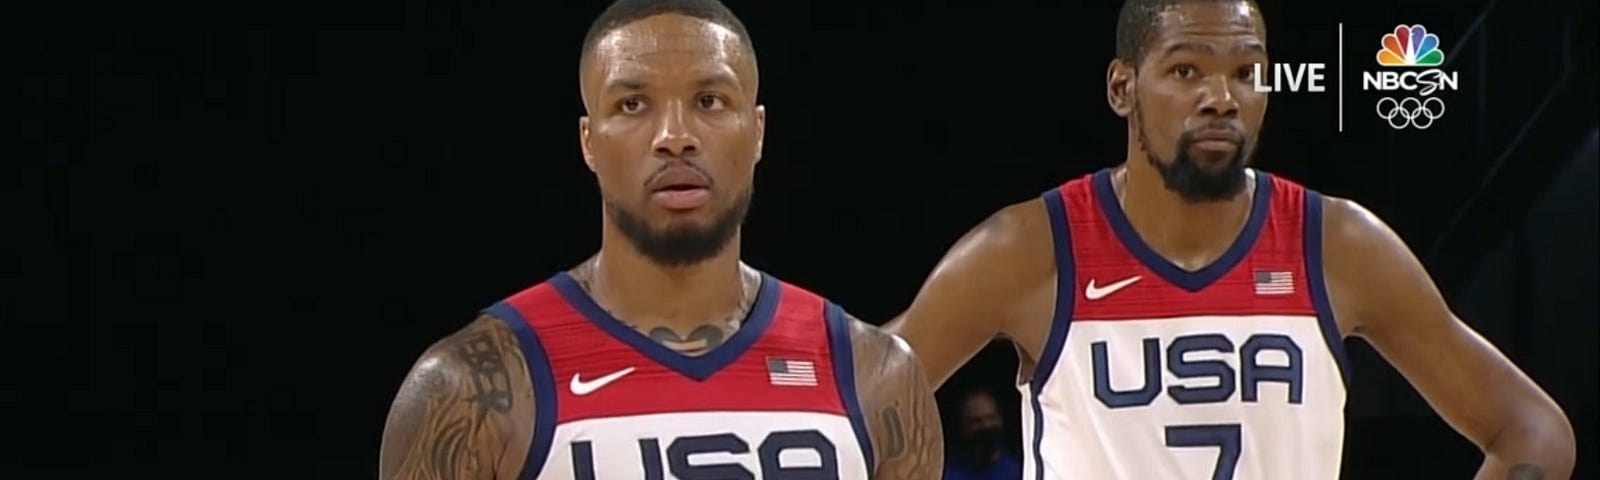 Kevin Durant and Damian Lillard are NBA superstars, deserving of a Team USA position. But are they enough?